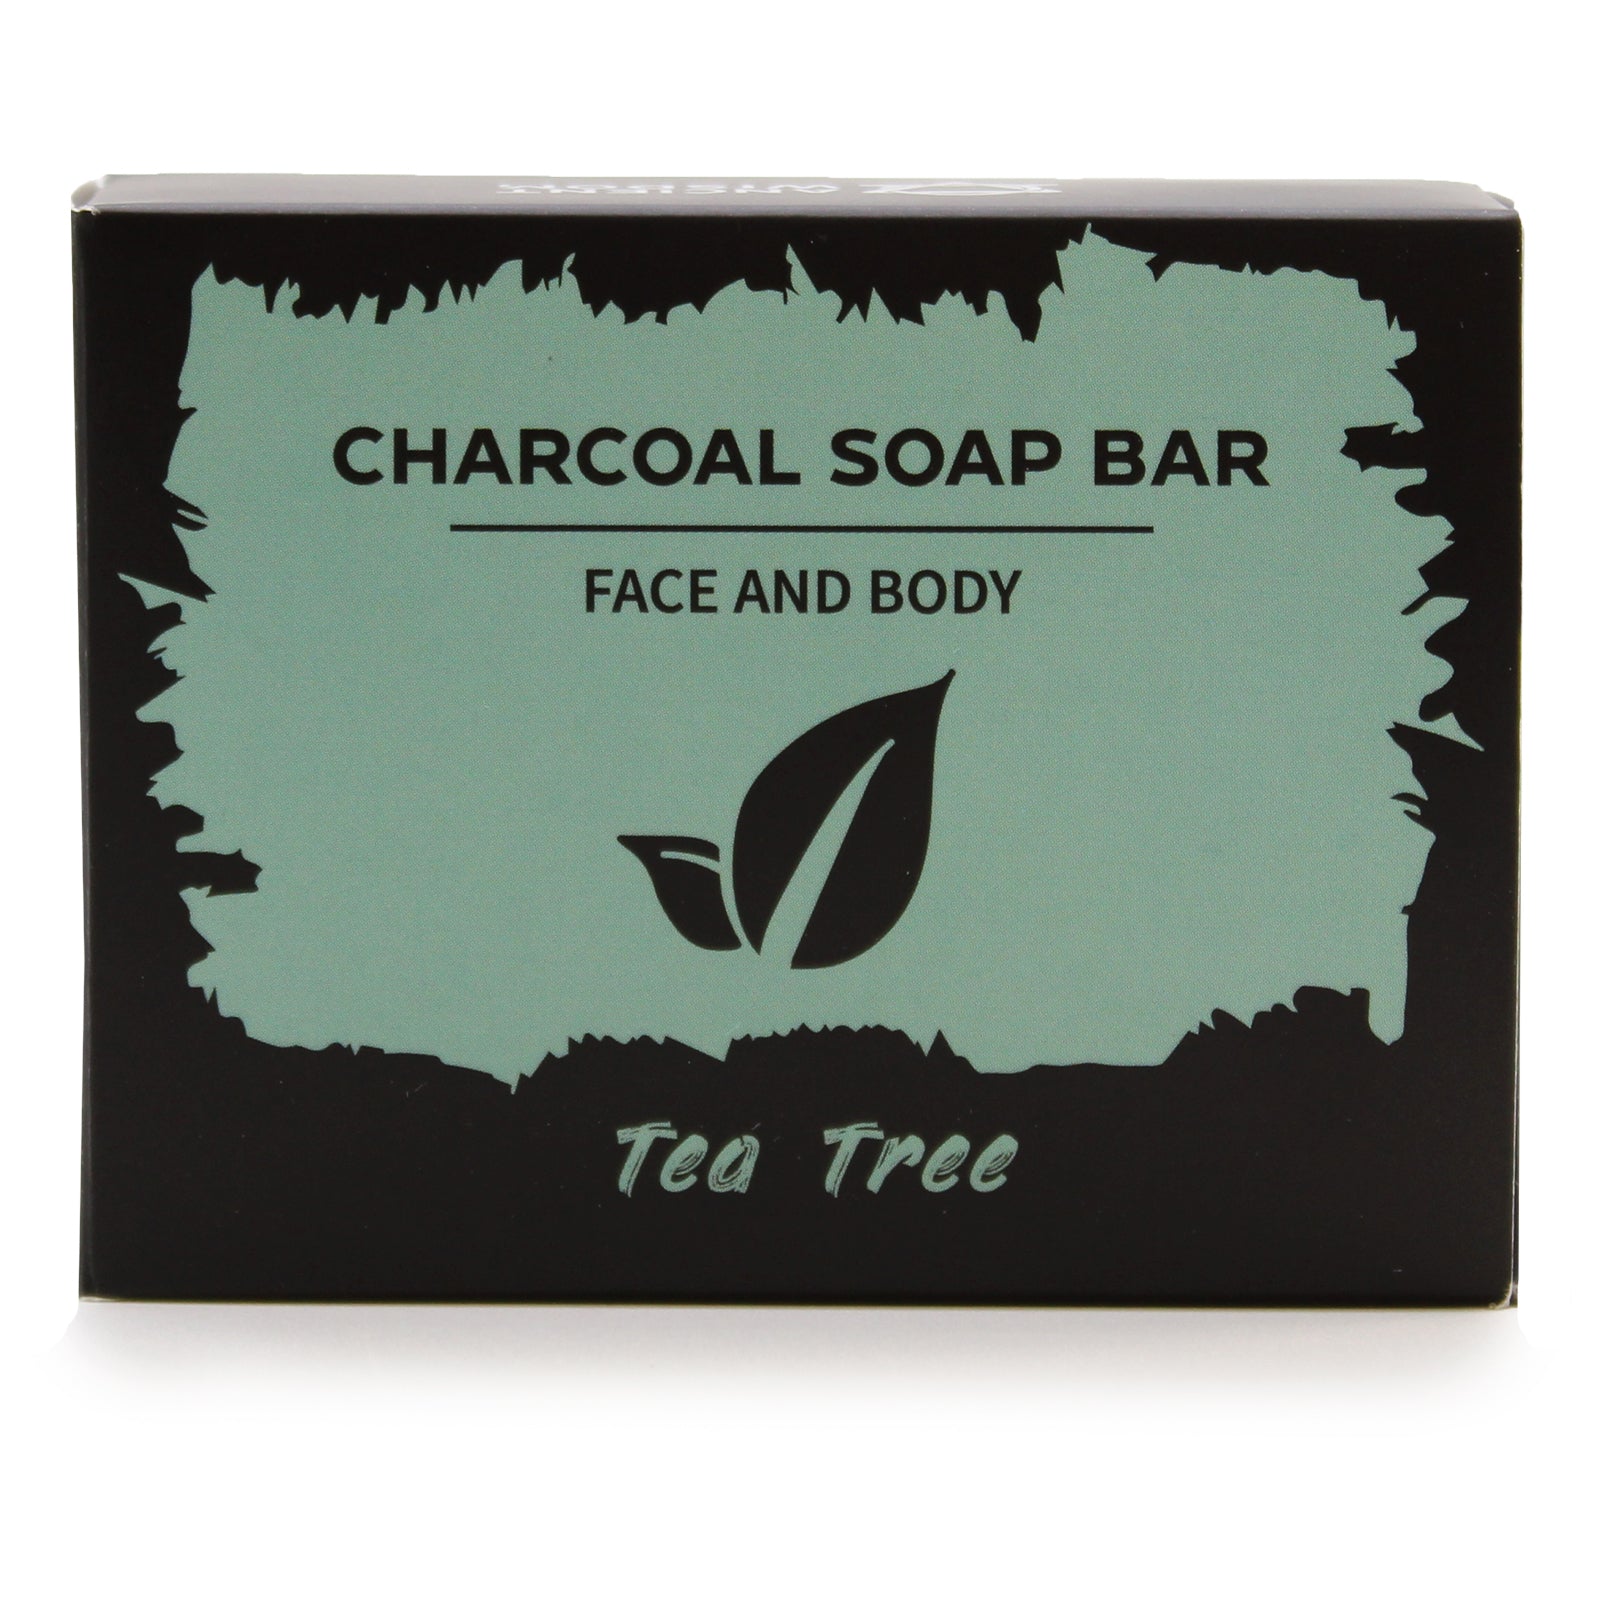 View Charcoal Soap 85g Tea Tree information